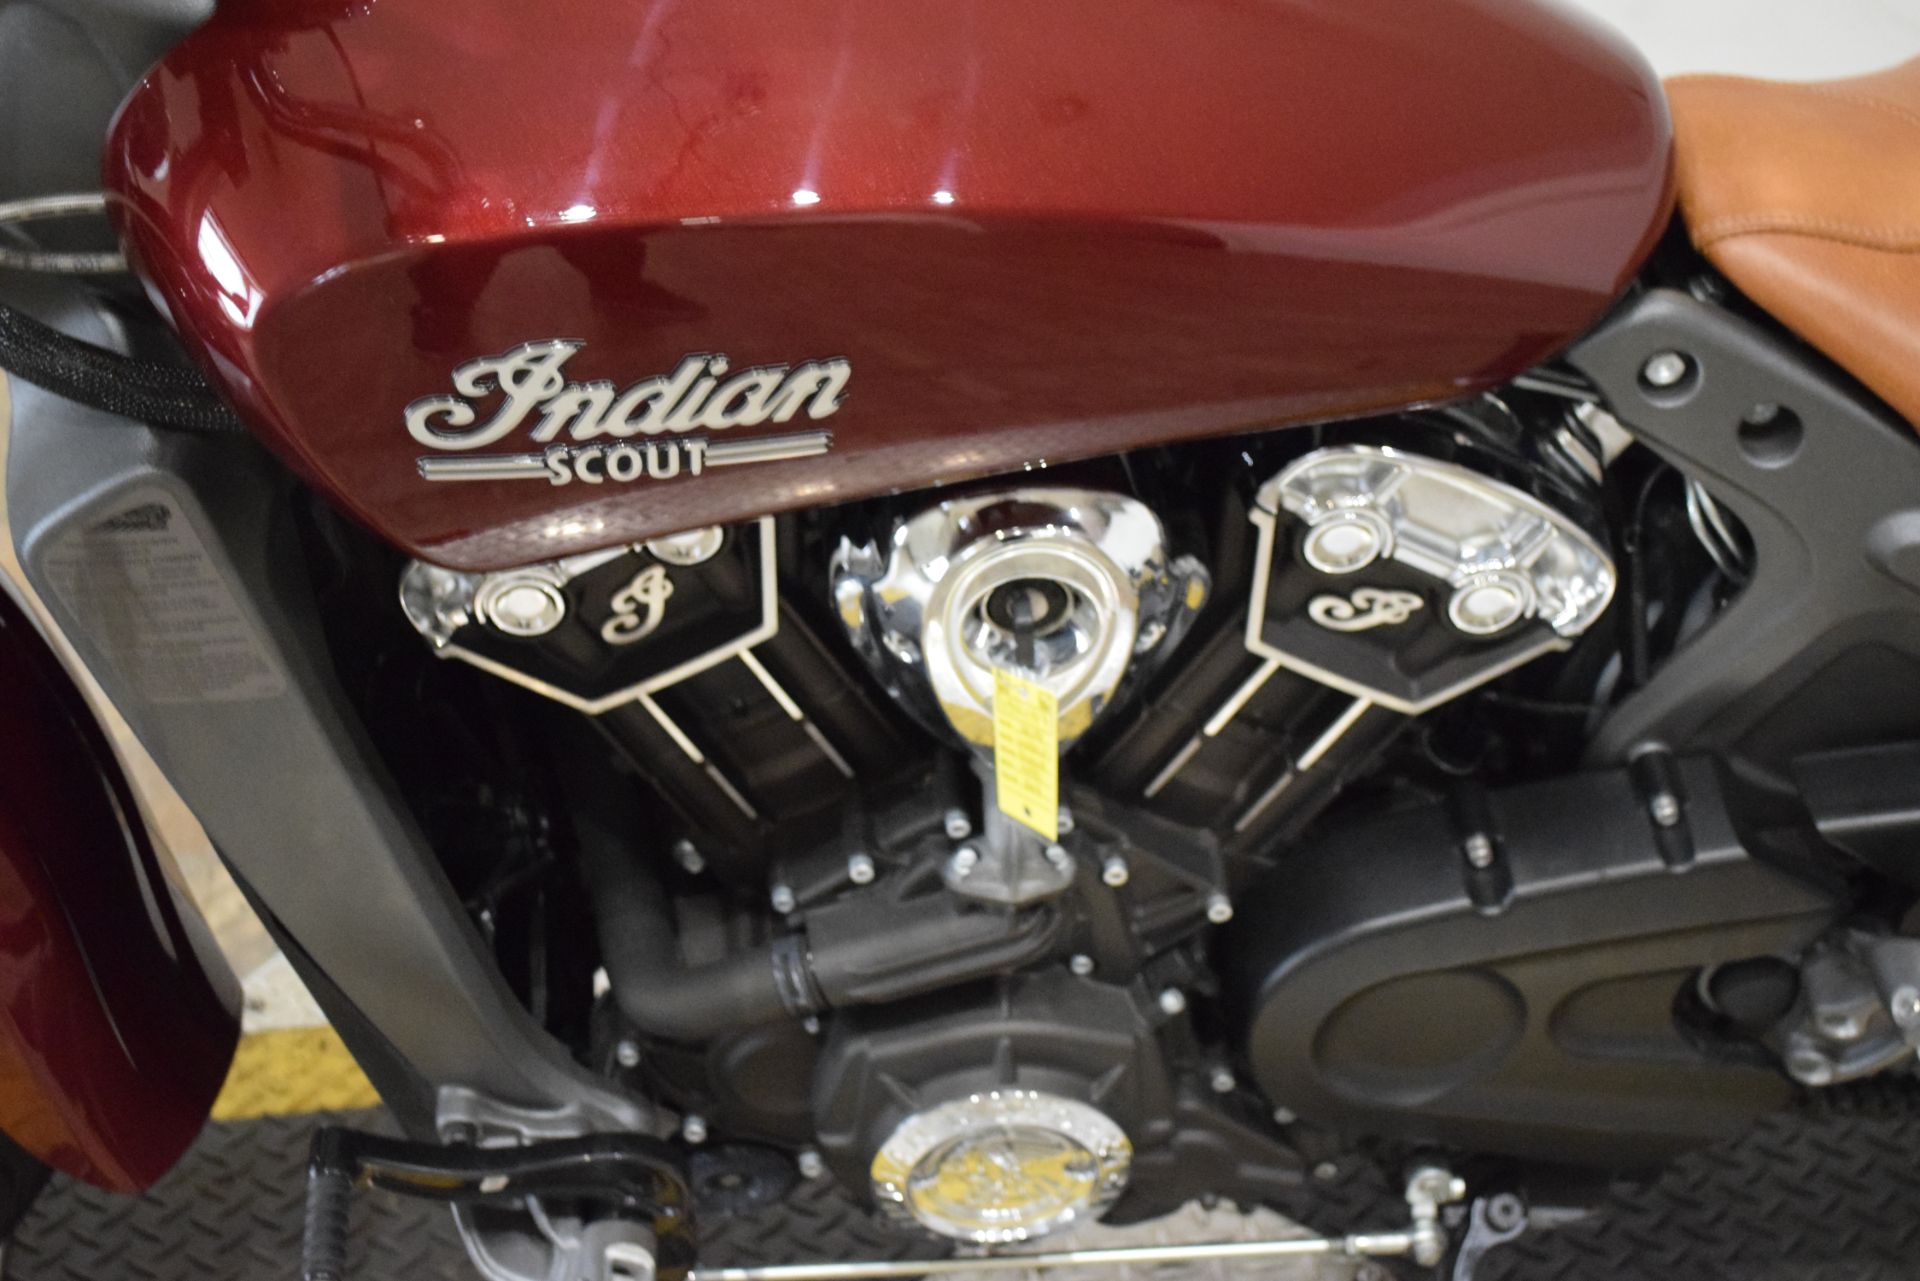 2018 Indian Motorcycle Scout® ABS in Wauconda, Illinois - Photo 18